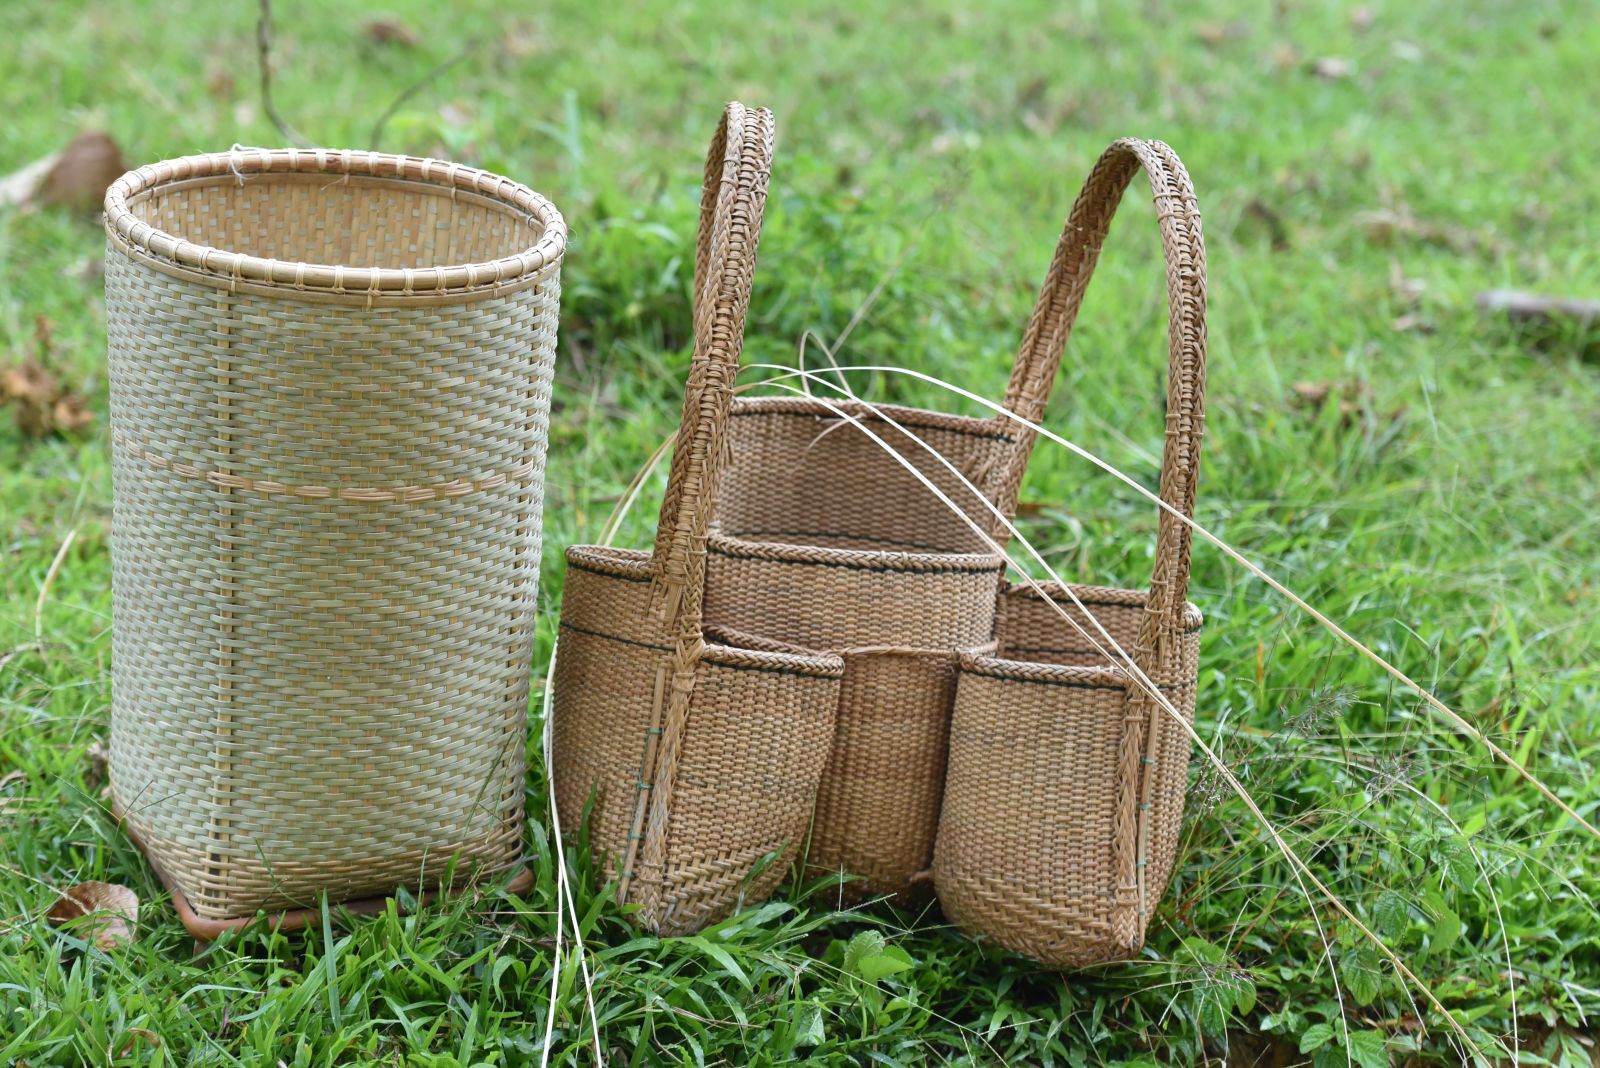 The large and small baskets of many designs have created the distinctions of the highland people